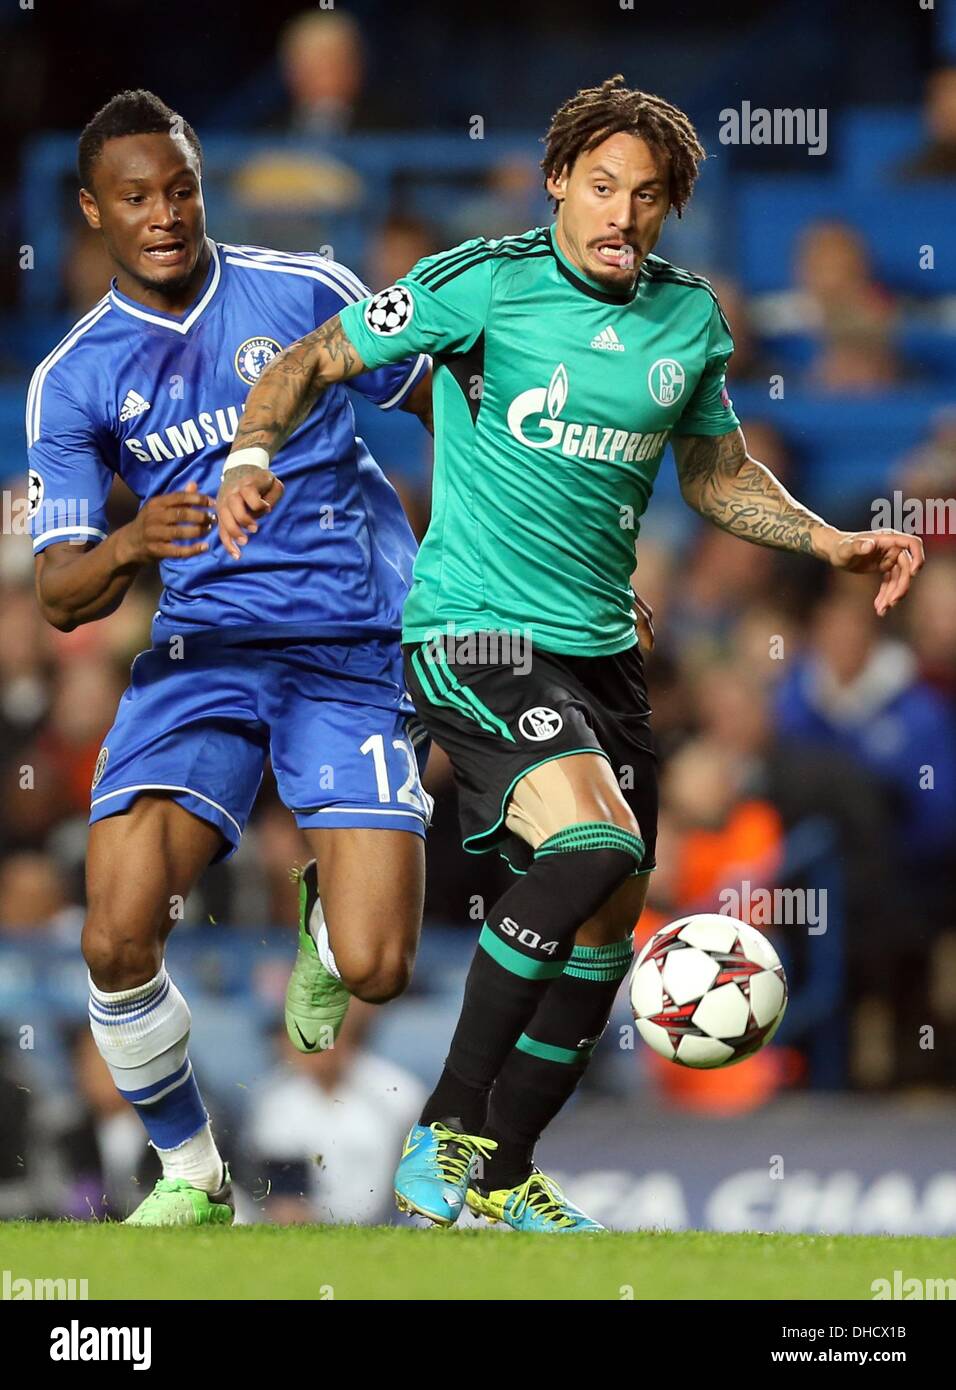 London, Britain. 06th Nov, 2013. Schalke's Jermaine Jones (R) and John Obi Mikel (L) of Chelsea vie for the ball during the UEFA Champions League group E soccer match between Chelsea FC and FC Schalke 04 at Stamford Bridge Stadium in London, Britain, 06 November 2013. Photo: Friso Gentsch/dpa/Alamy Live News Stock Photo